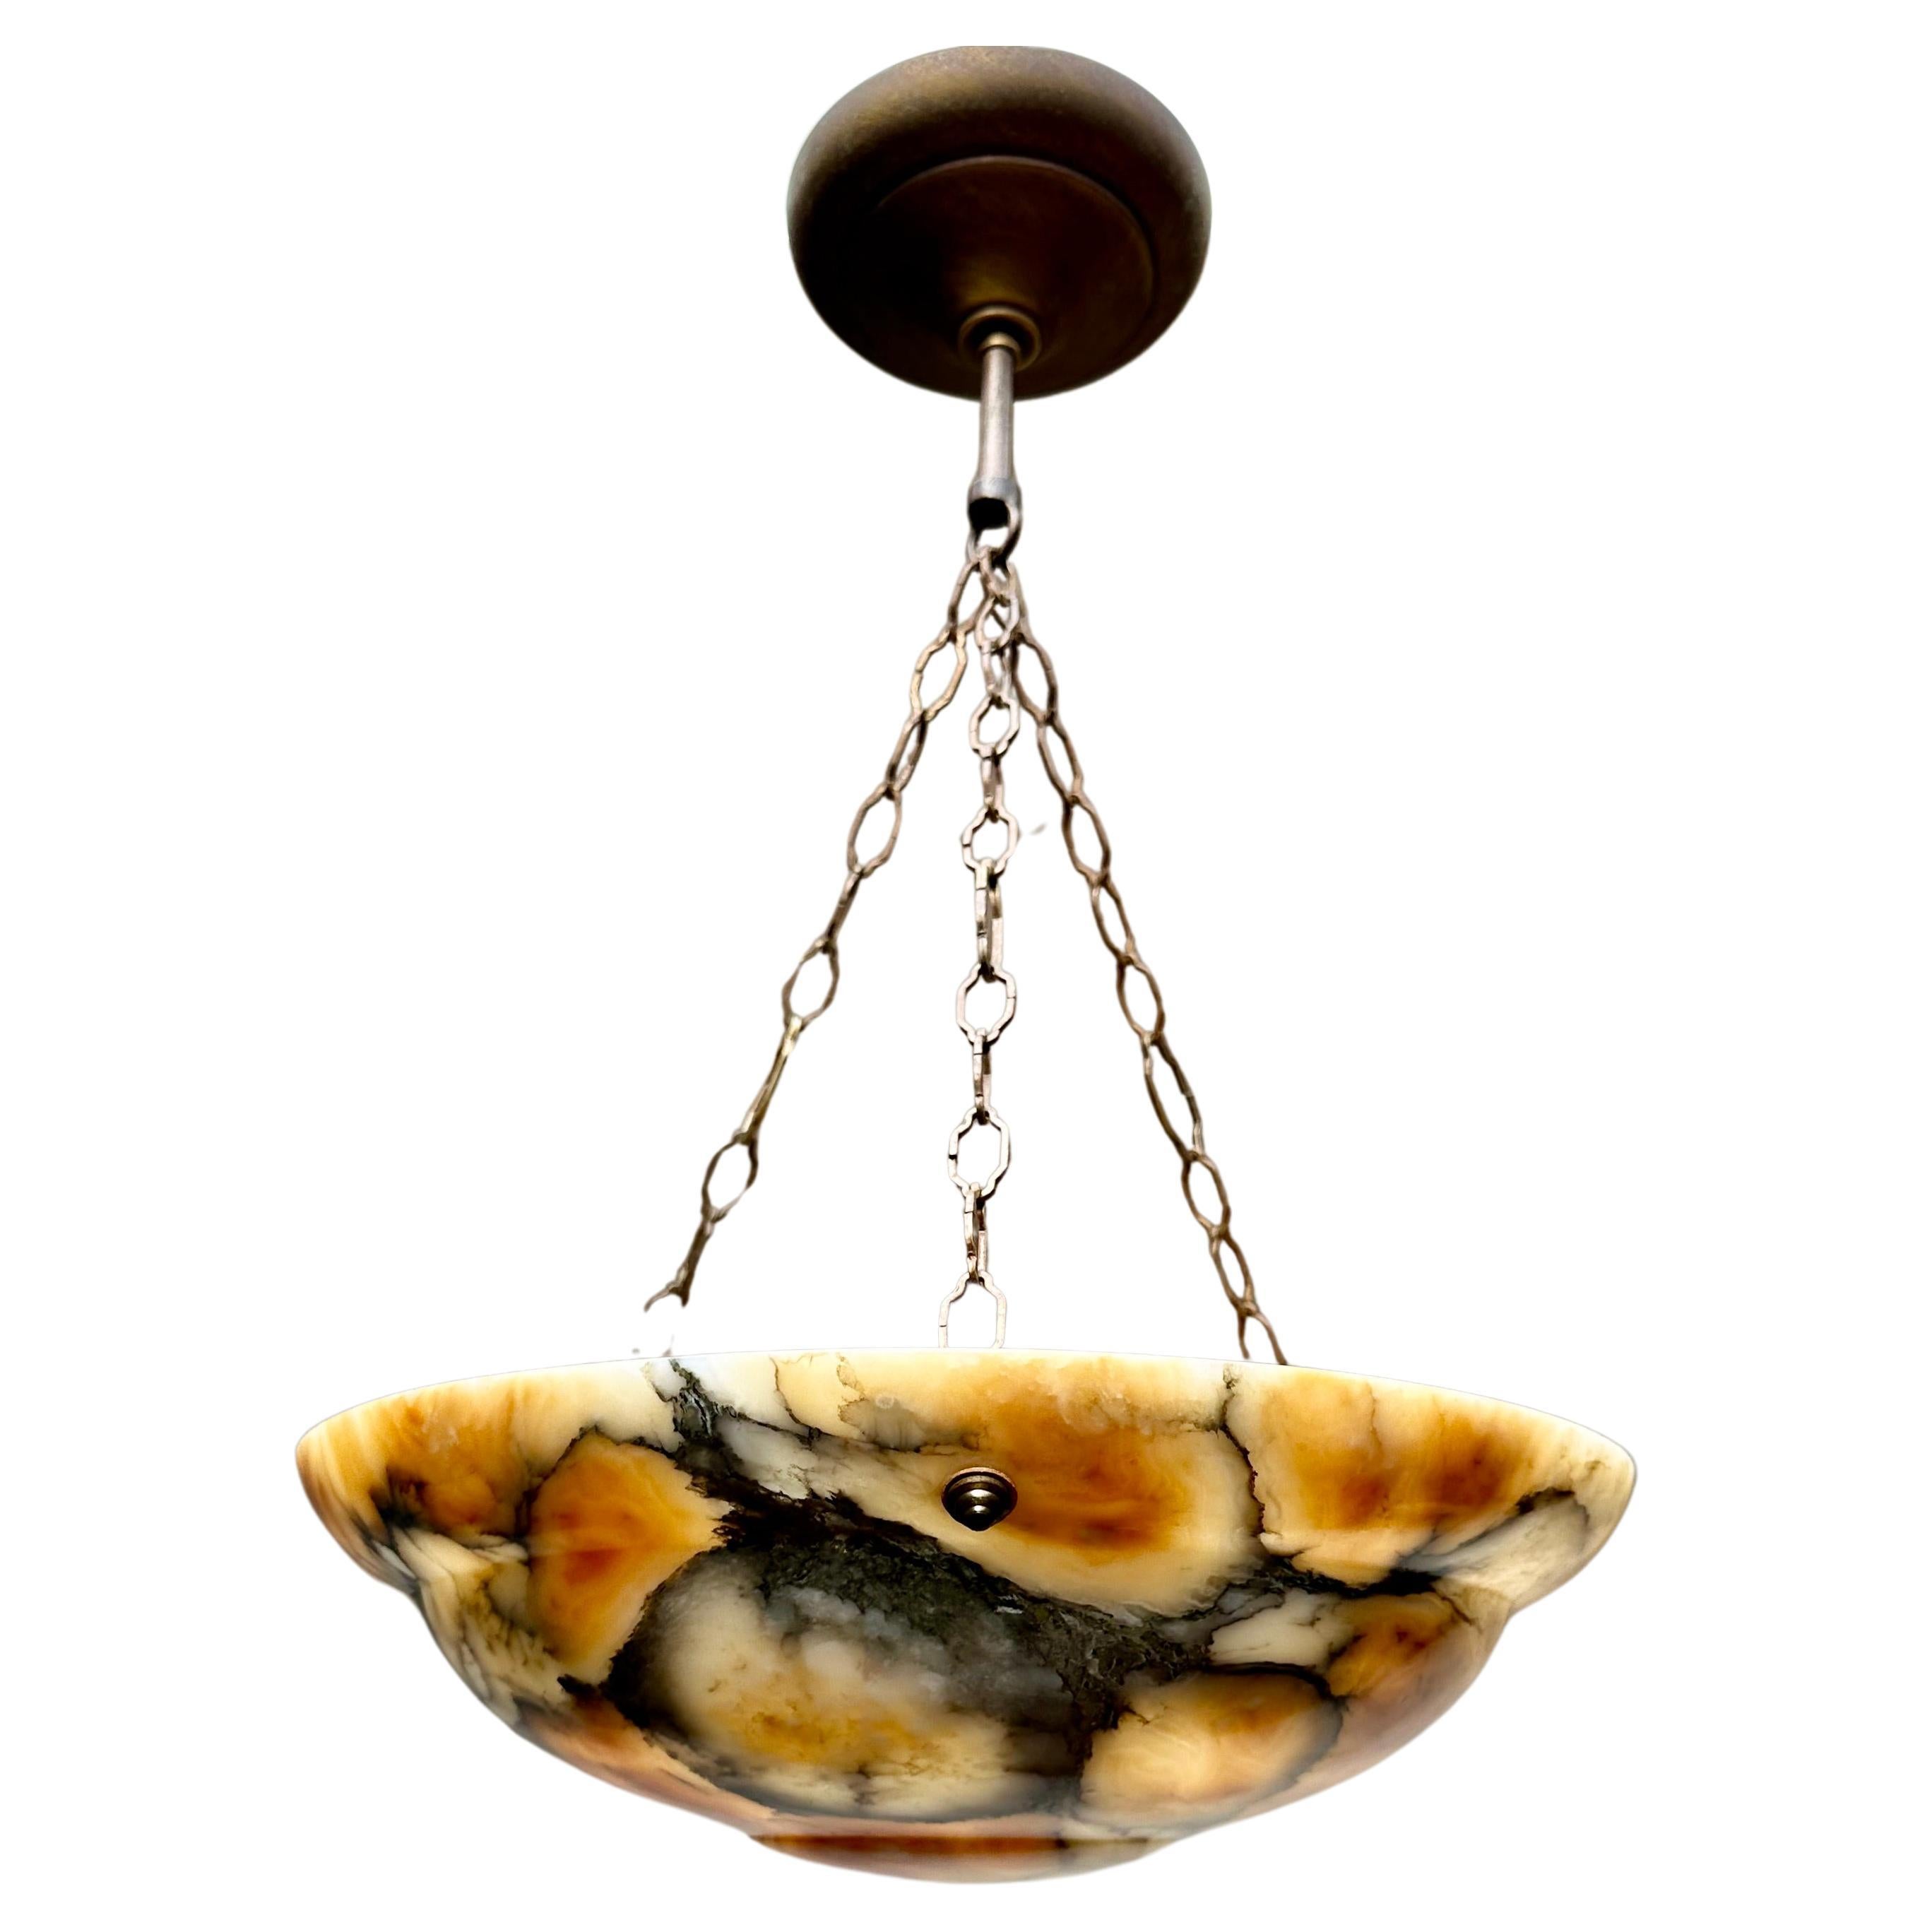 Great shape and warmest color alabaster light with adjustable canopy.

If you are looking for a truly beautiful and good quality condition alabaster pendant then this colorful striking specimen could be the one or you. This regular size, but